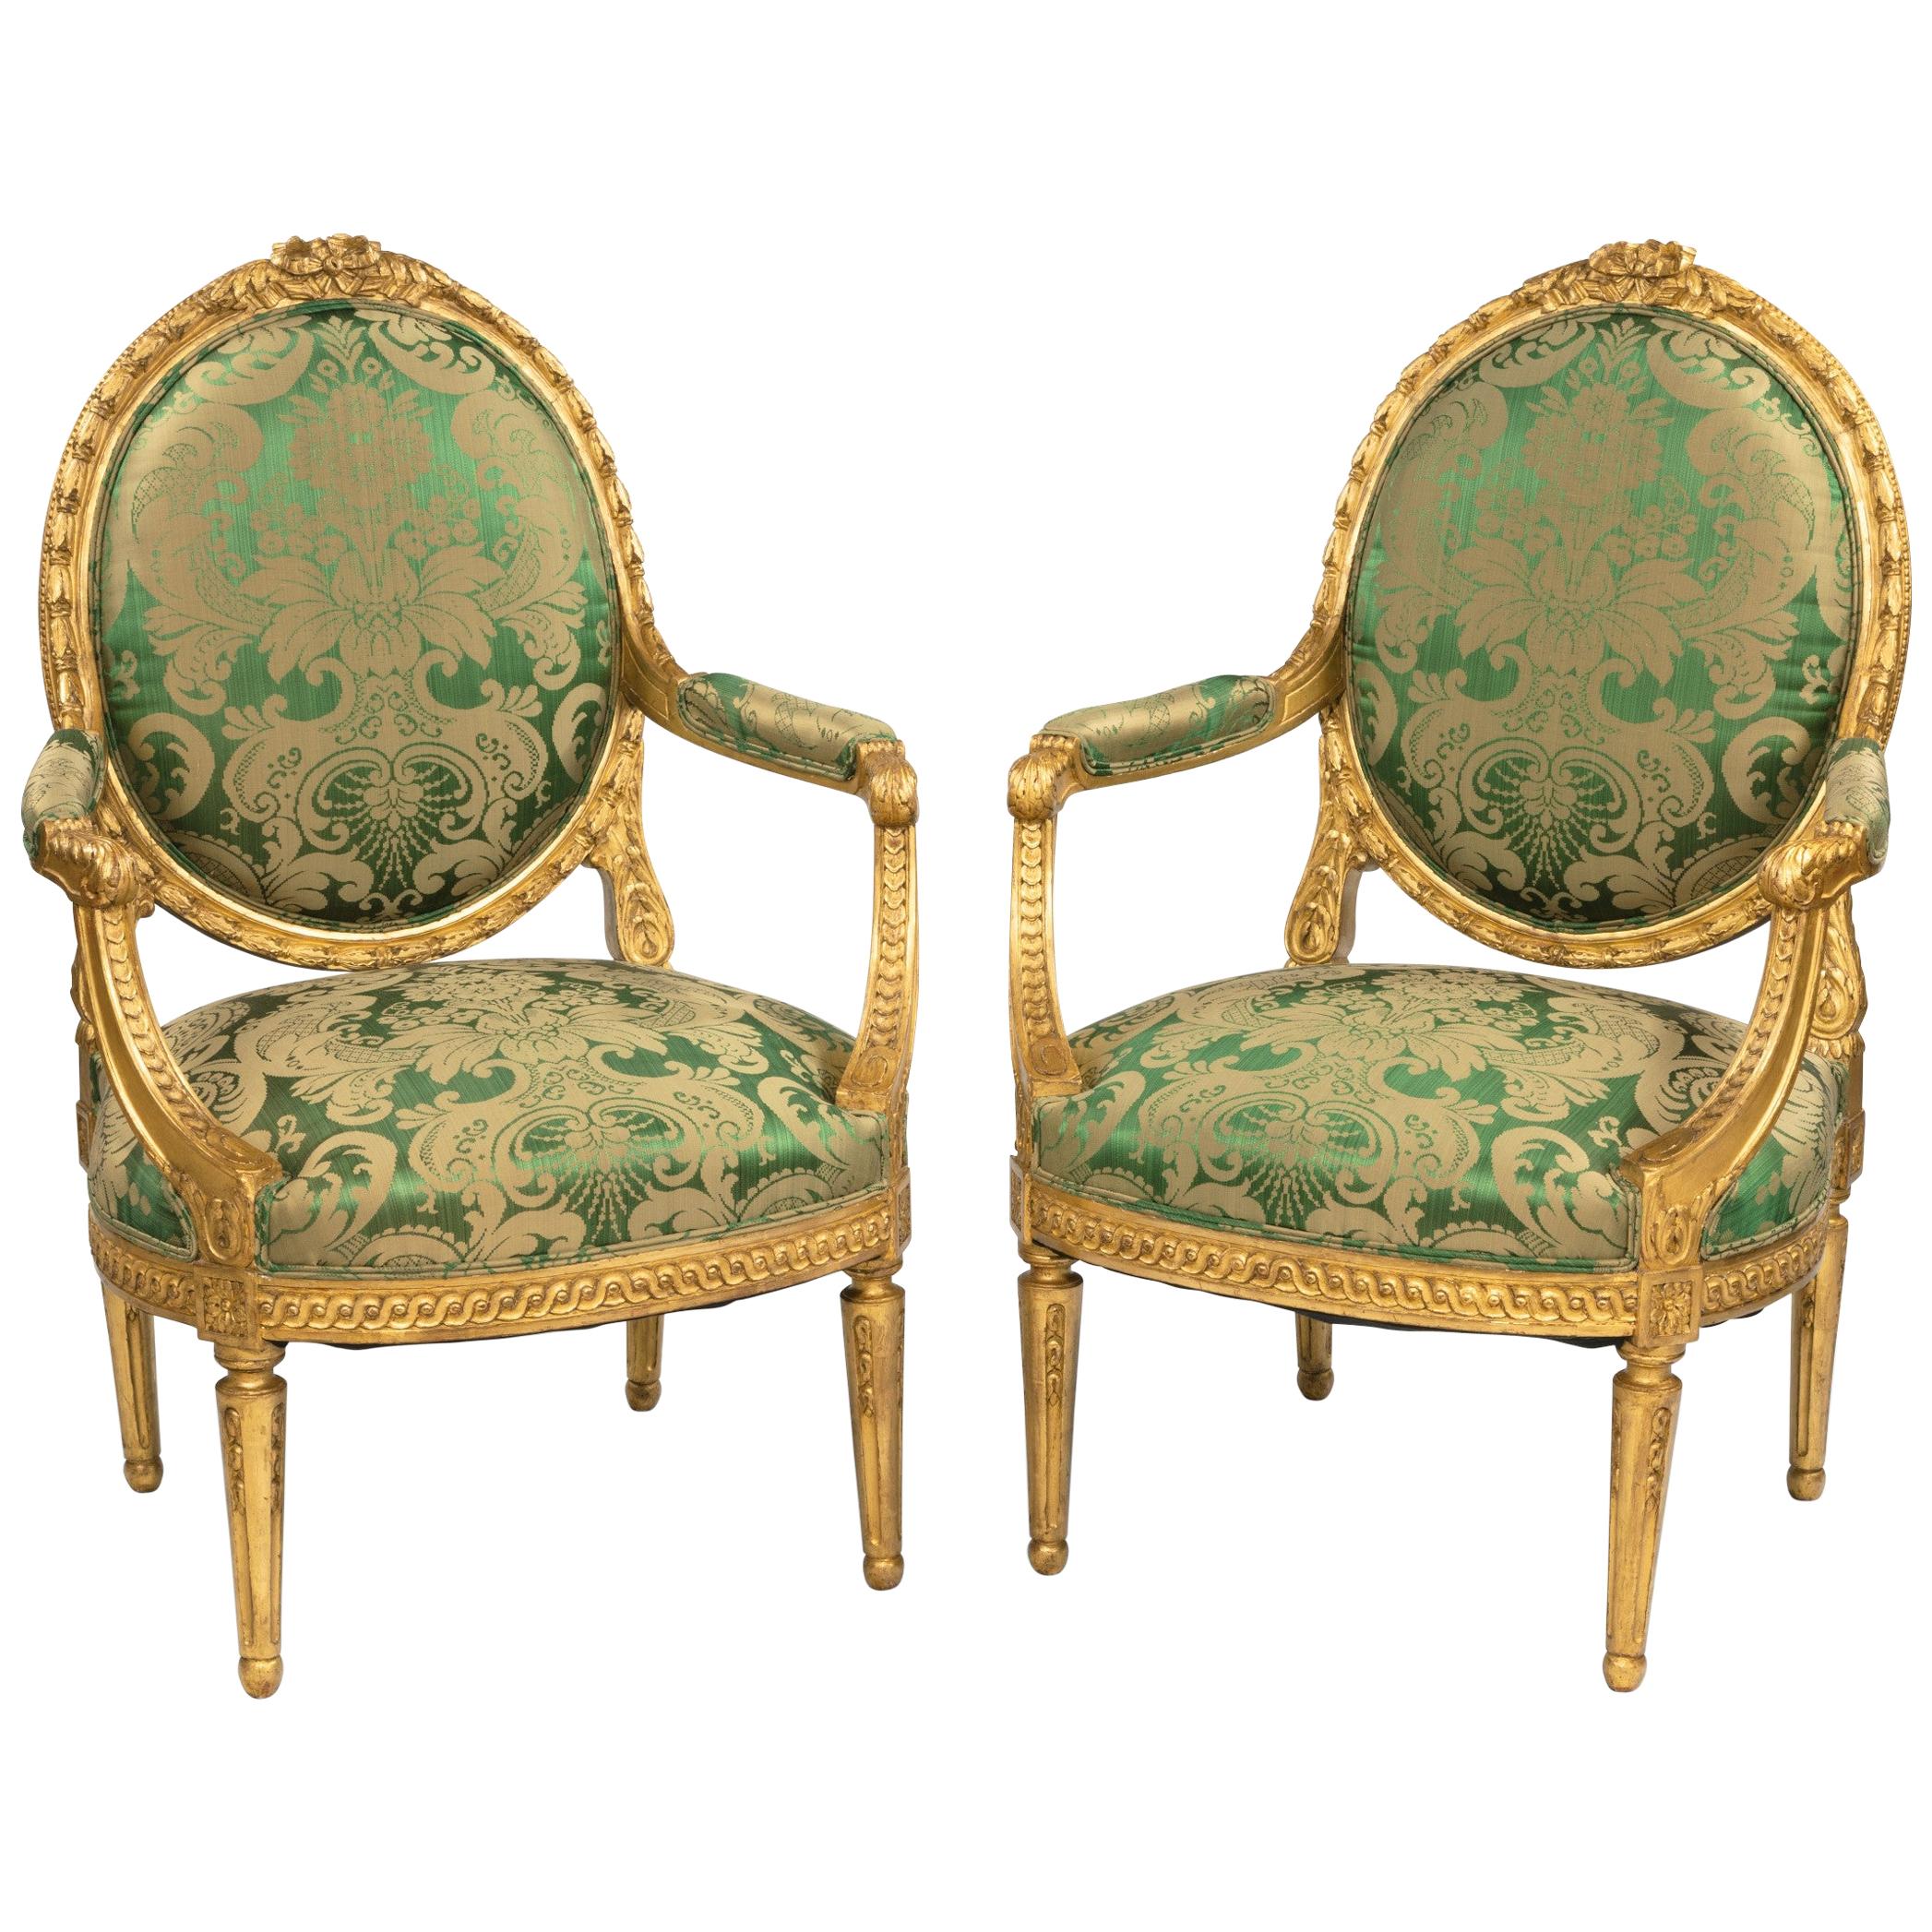 Pair of Antique Louis XVI Style Carved Armchairs with Green Upholstery